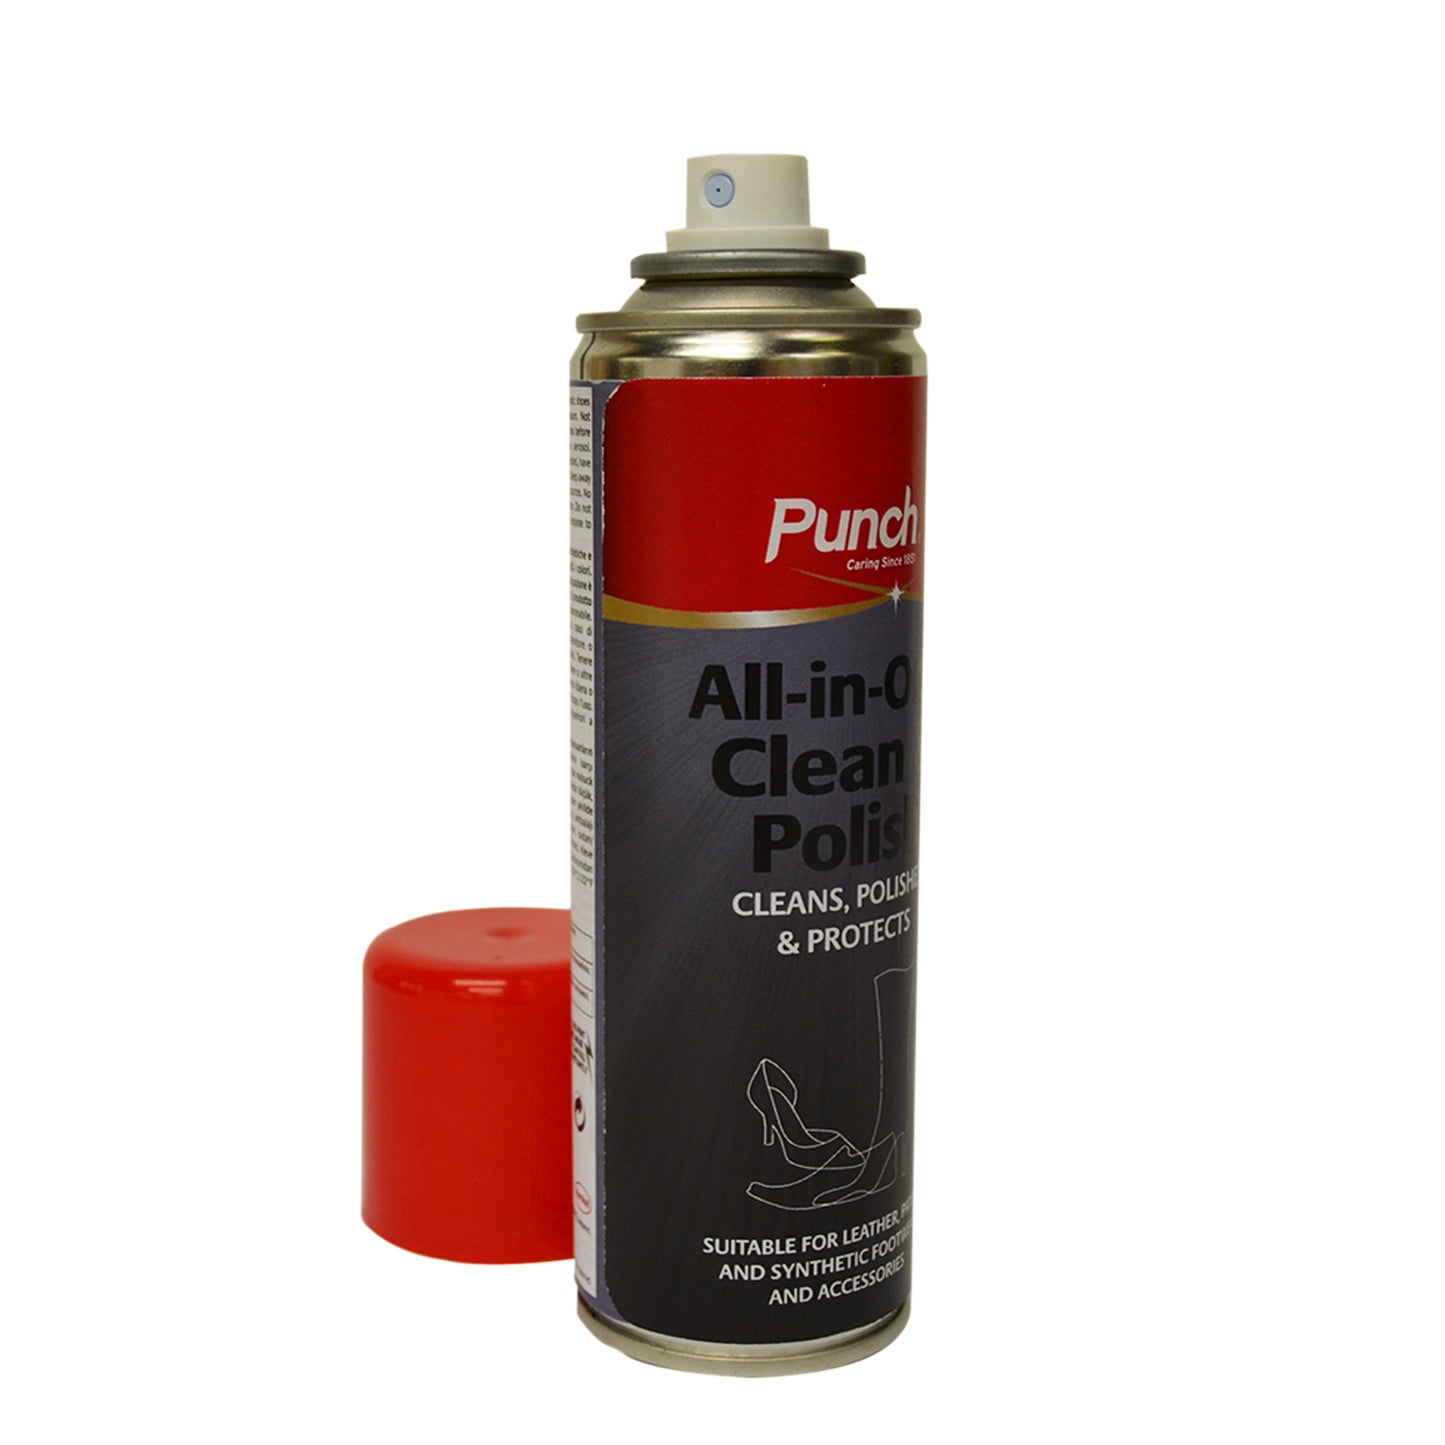 Punch All-in-One Cleaner & Polish